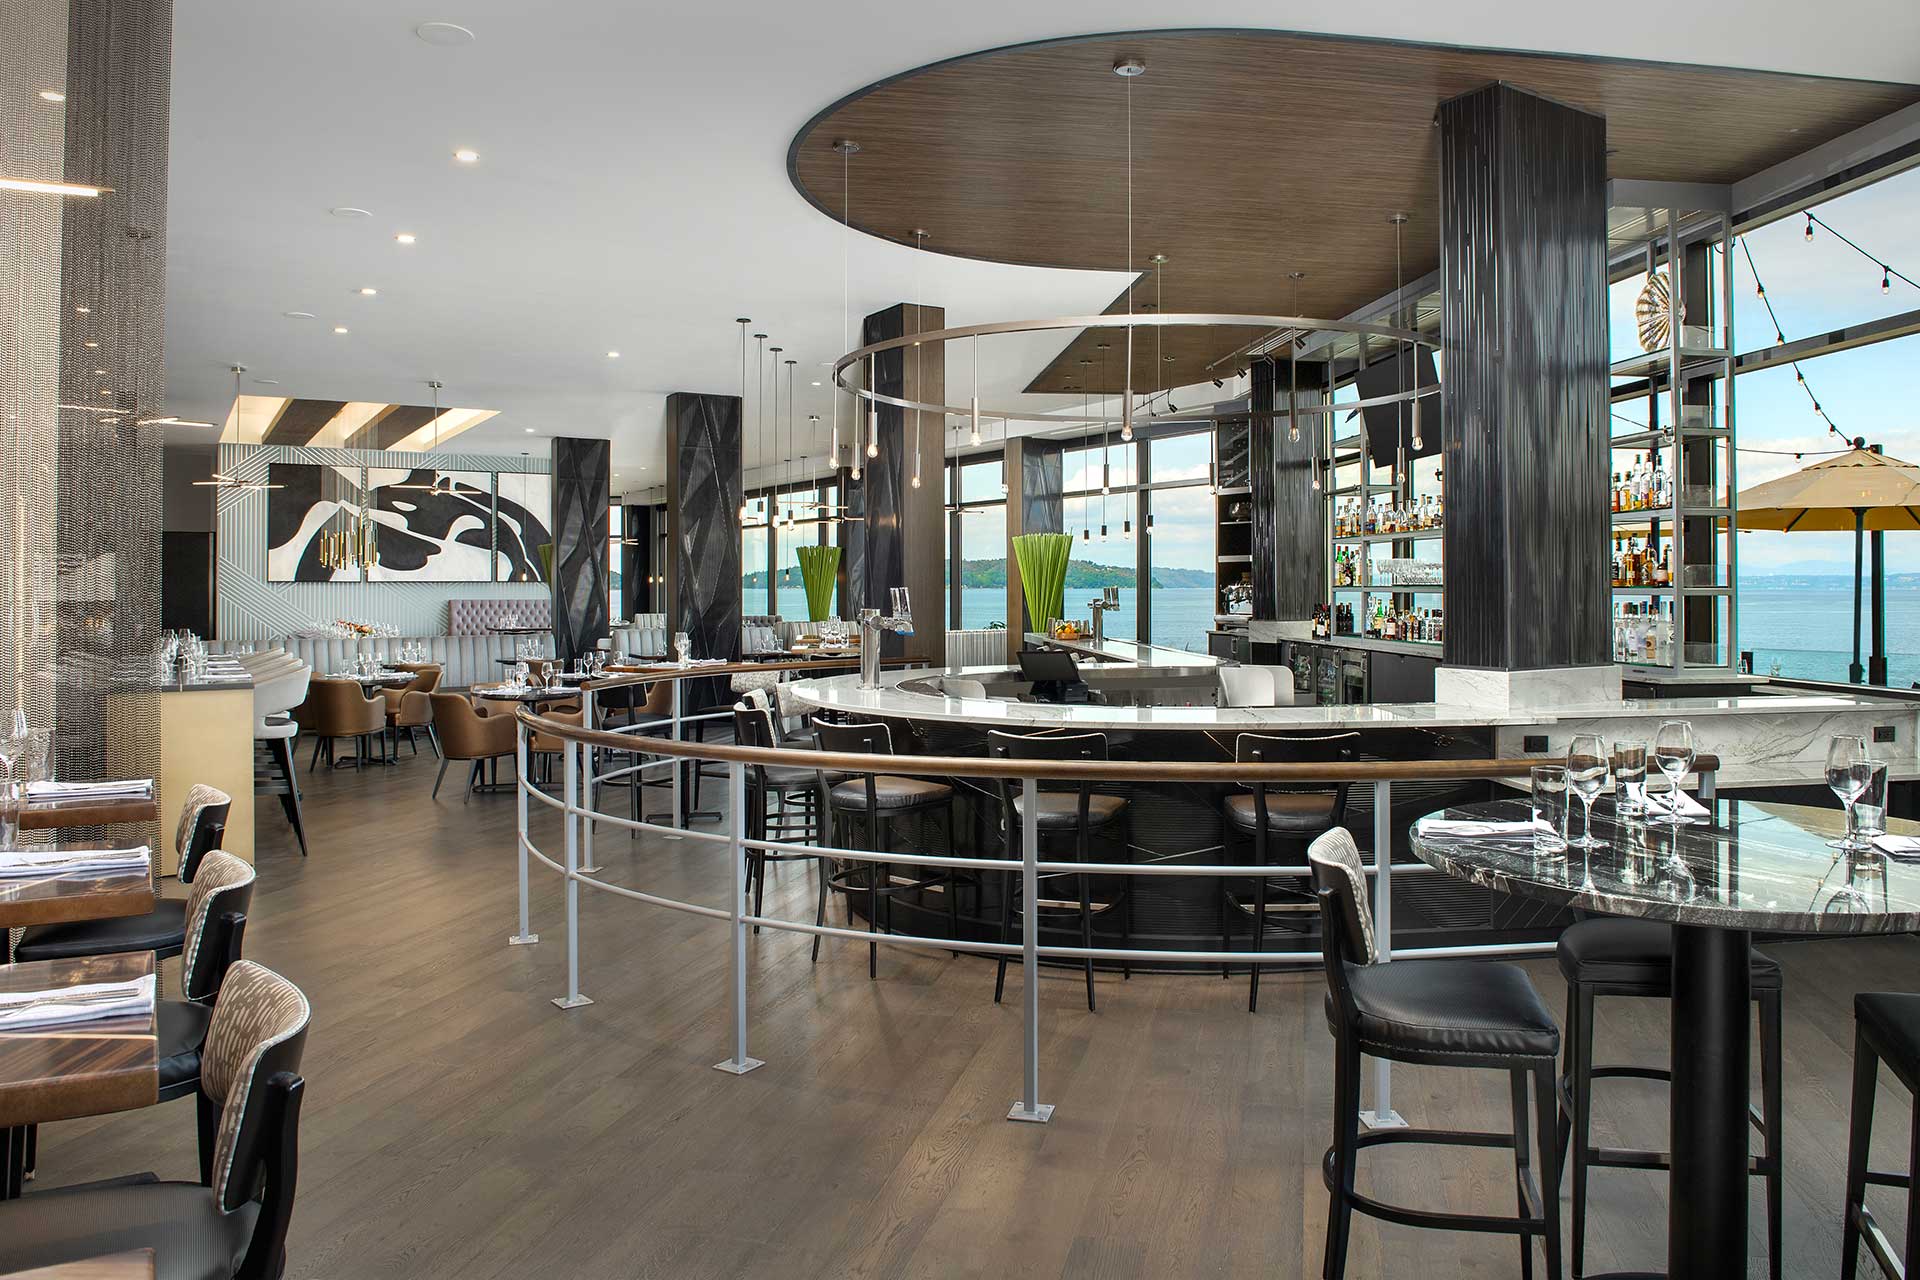 Main dining room and bar with a view of the water at Copper and Salt Northwest Kitchen.